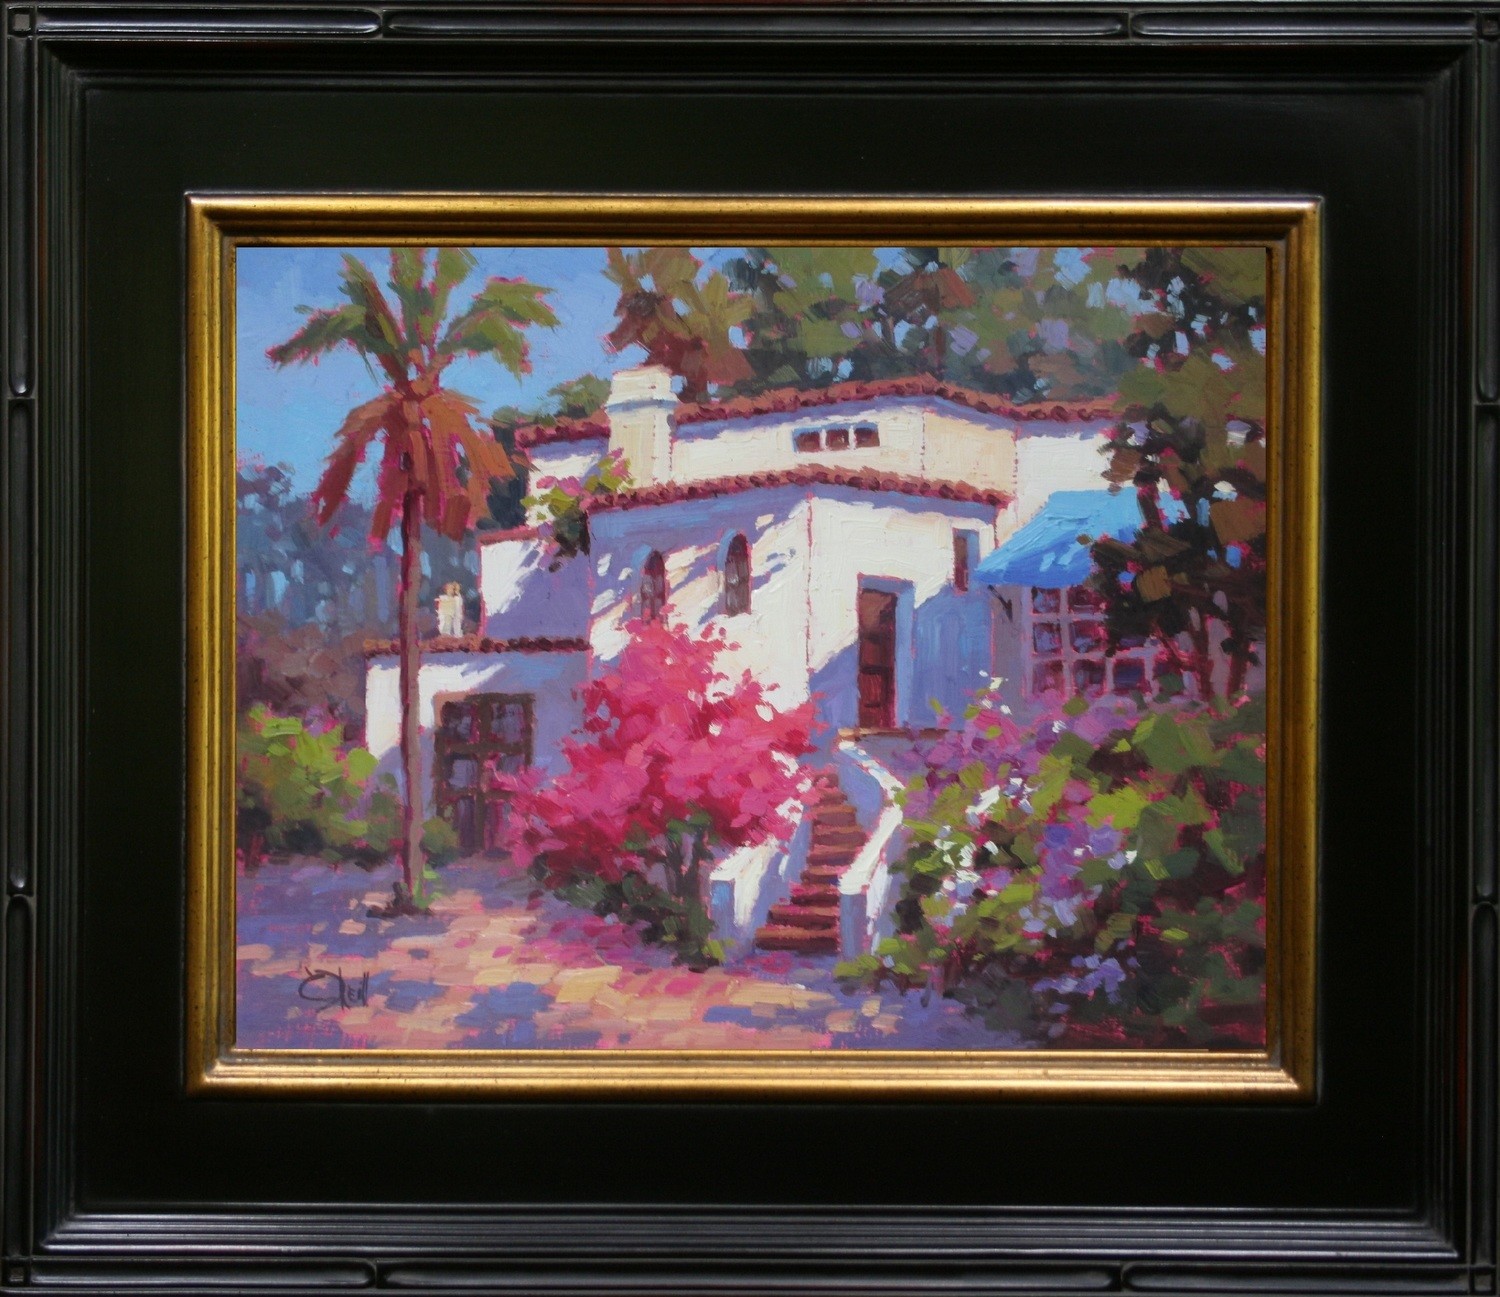 Villa in Afternoon Sun  12 x 16 oil painting. Framed price , Also available unframed. Free Shipping